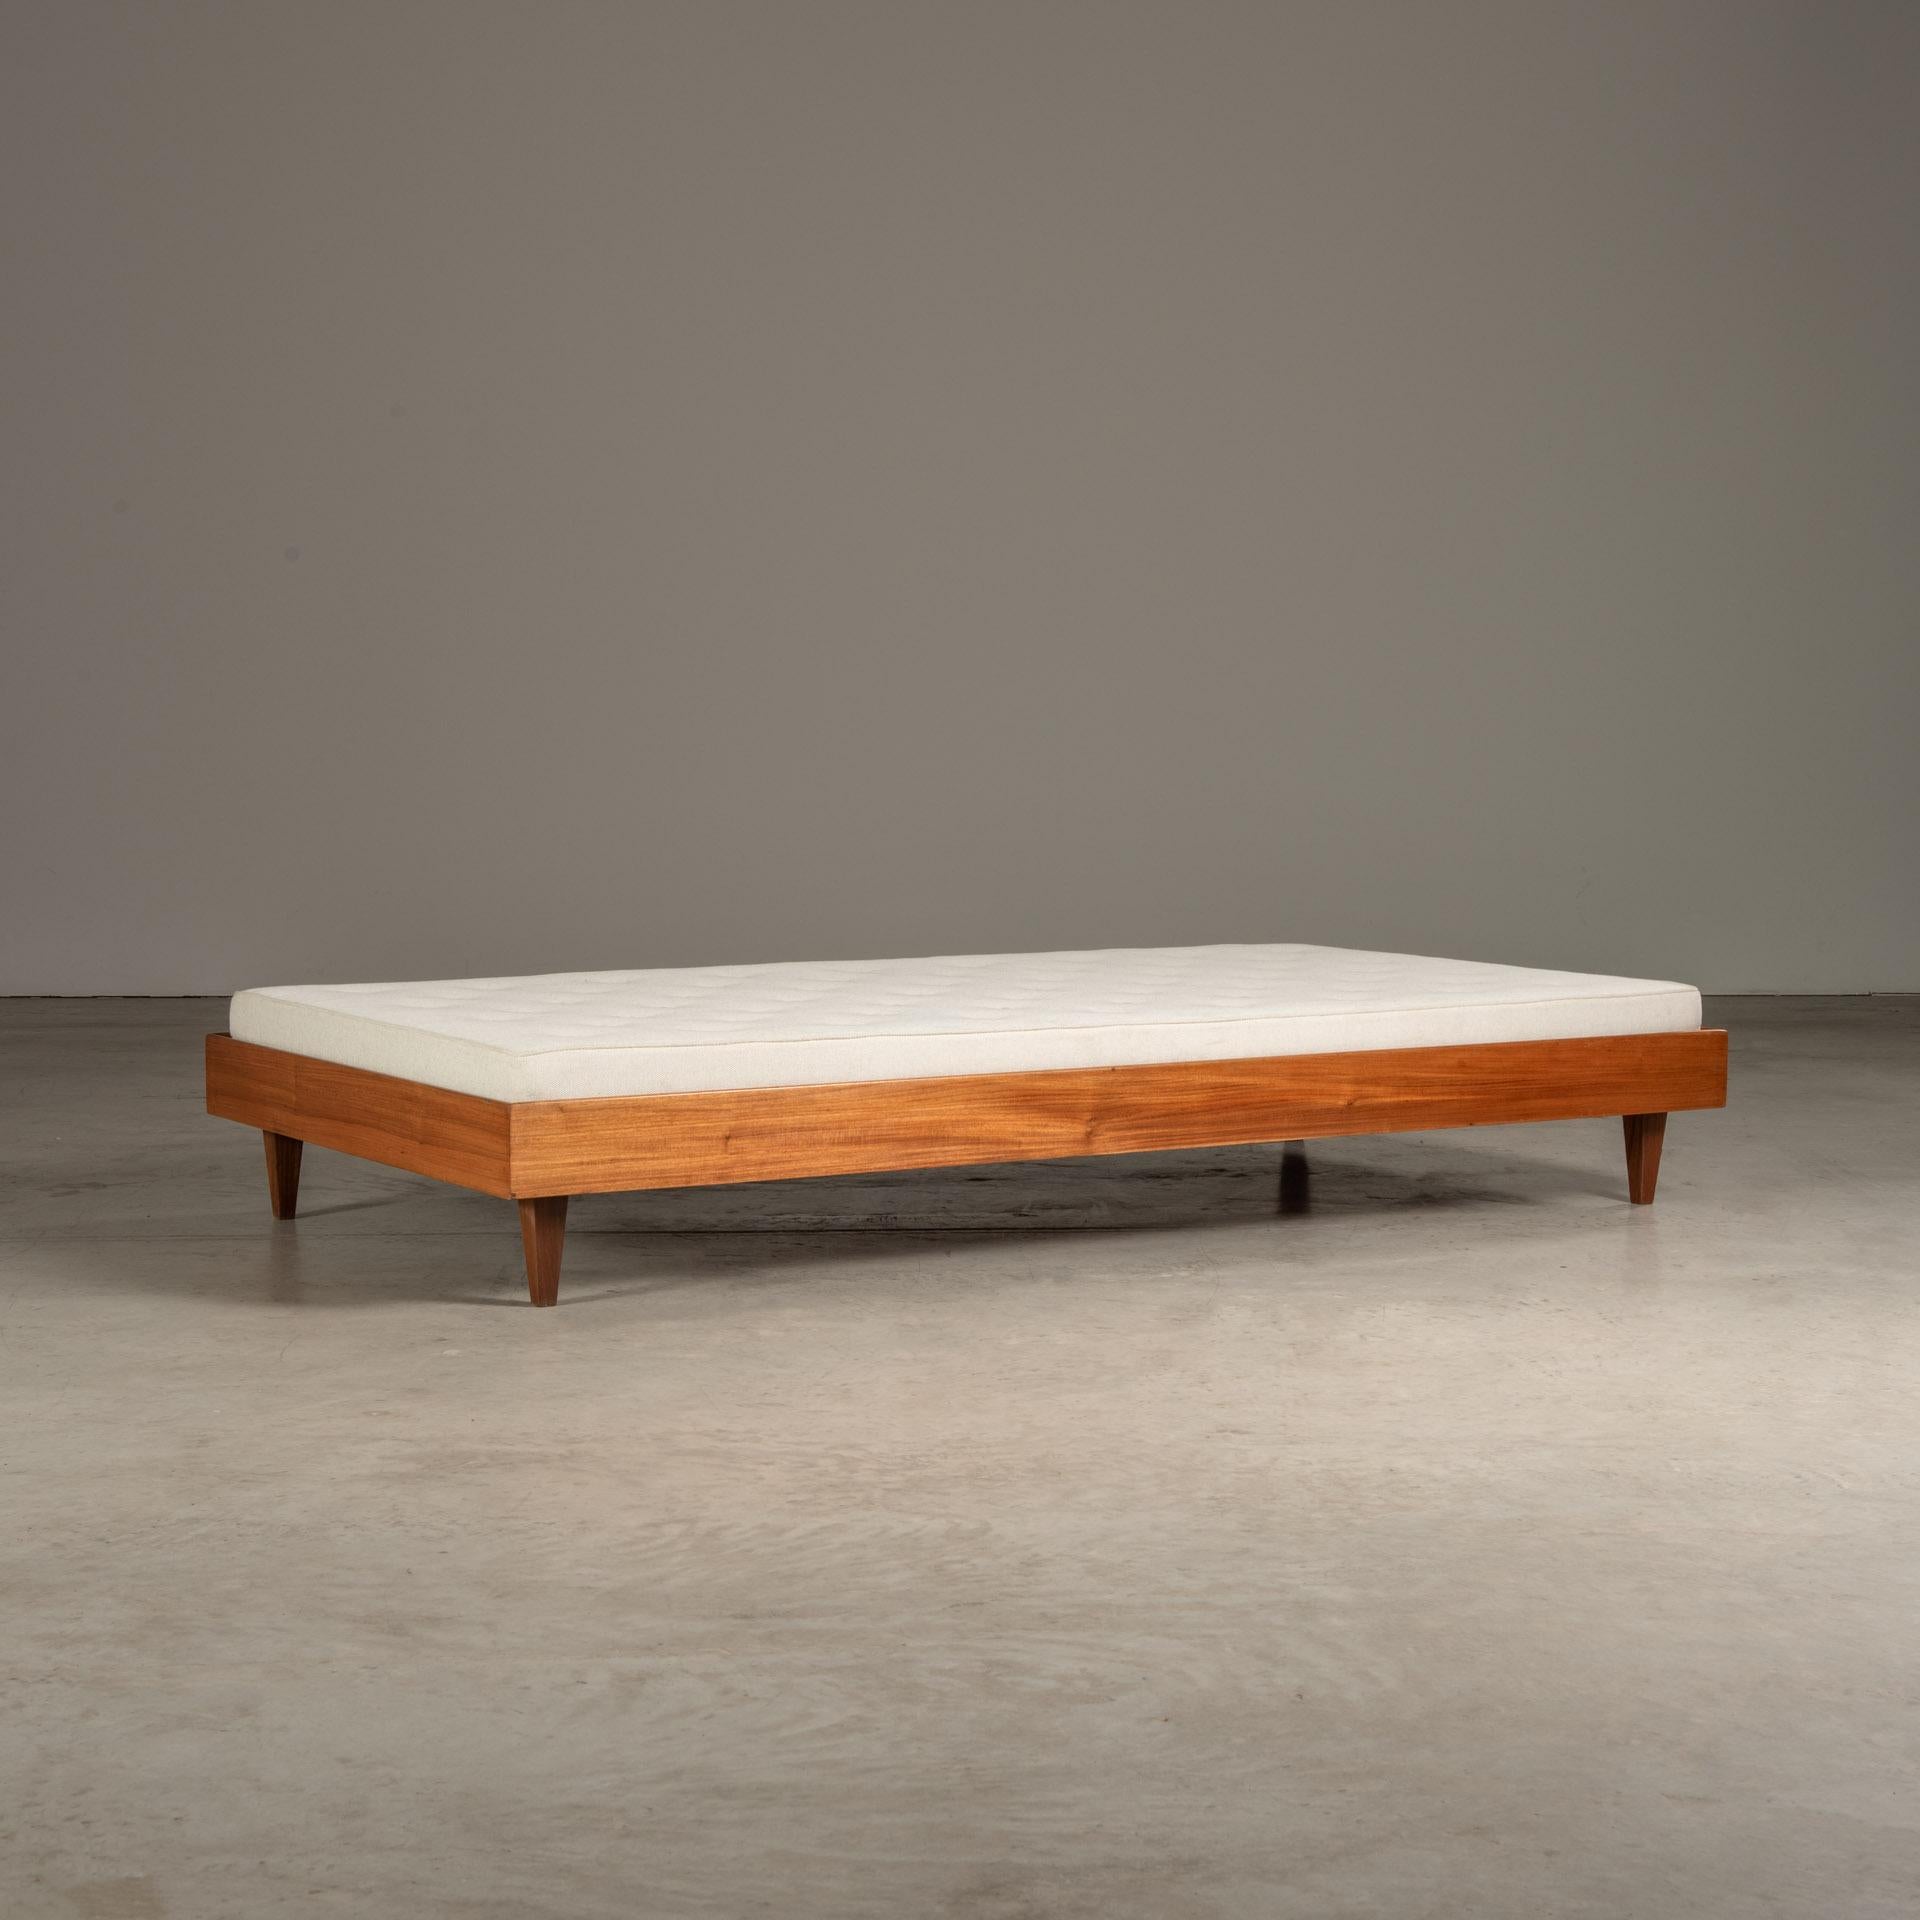 The daybed, manufactured by Liceu de Artes e Ofícios, is a prime example of mid-20th century Brazilian furniture design, which is renowned for its blend of modernist principles with traditional Brazilian materials and techniques.

Liceu de Artes e